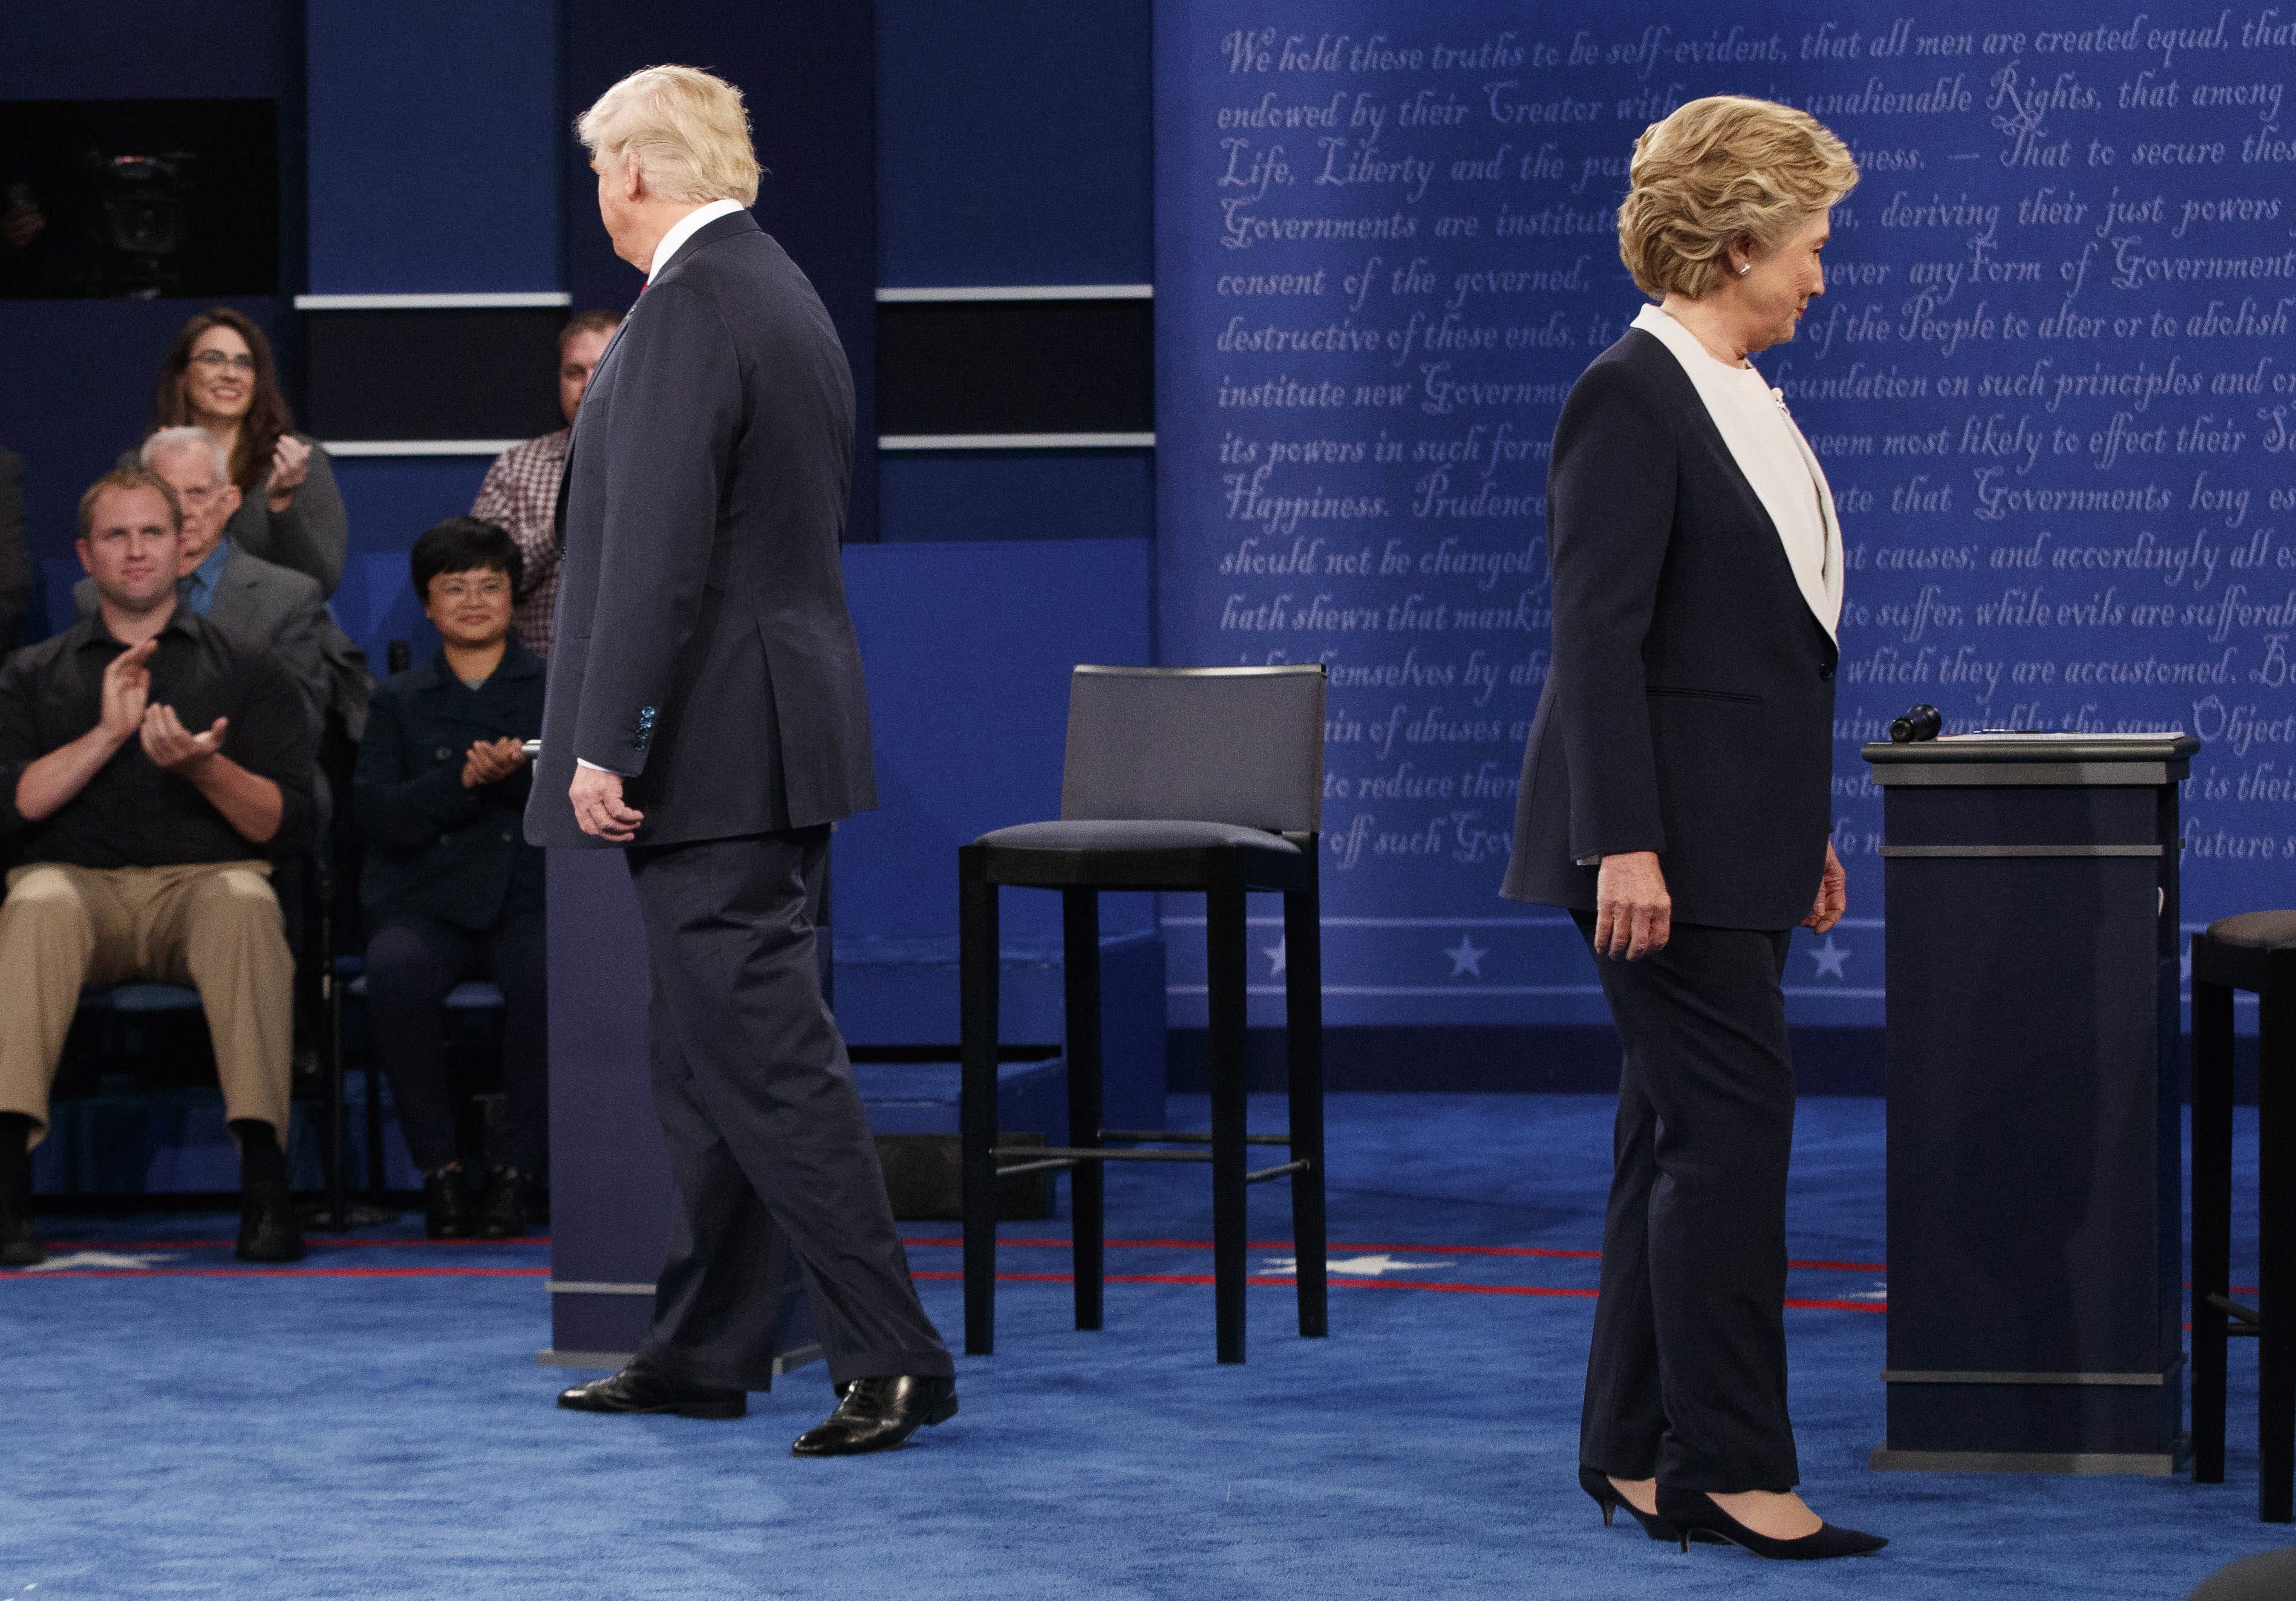 Republican presidential candidate Donald Trump, left, and Democratic presidential candidate Hillary Clinton walk to their chairs as they arrive for the second presidential debate at Washington University in St. Louis. Andrew Cullison, a professor at DePauw University in Indiana who is studying skepticism and its relation to contemporary politics, says the internet has allowed lies to gain traction and for people to insulate themselves from those who disagree. He says controlled studies have found that, even when provided evidence that something is false, many simply double-down and increase their level of confidence in a belief's validity.